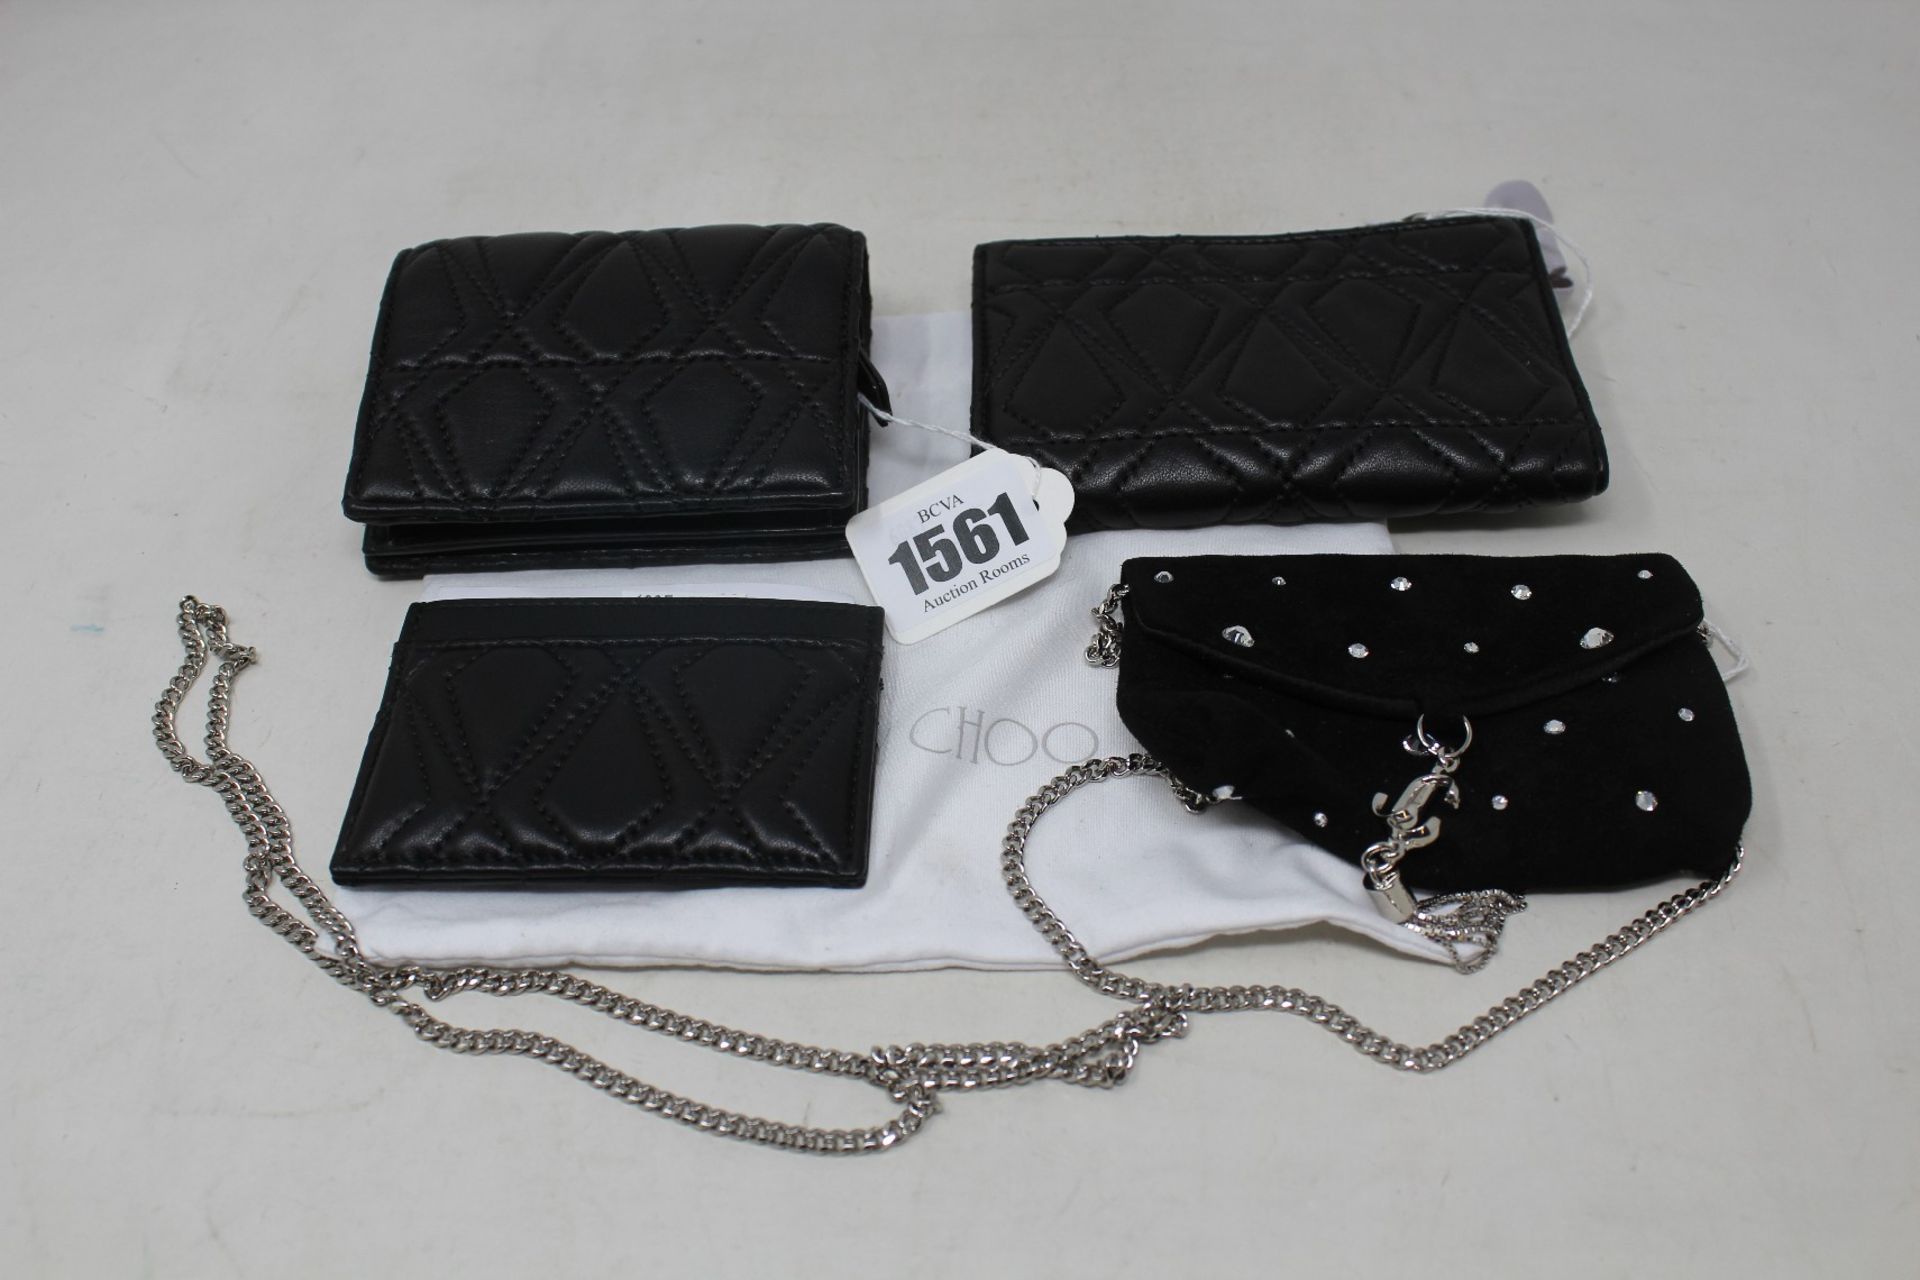 Two as new Jimmy Choo purses, a small pouch on chain and a card holder (No tags, photography